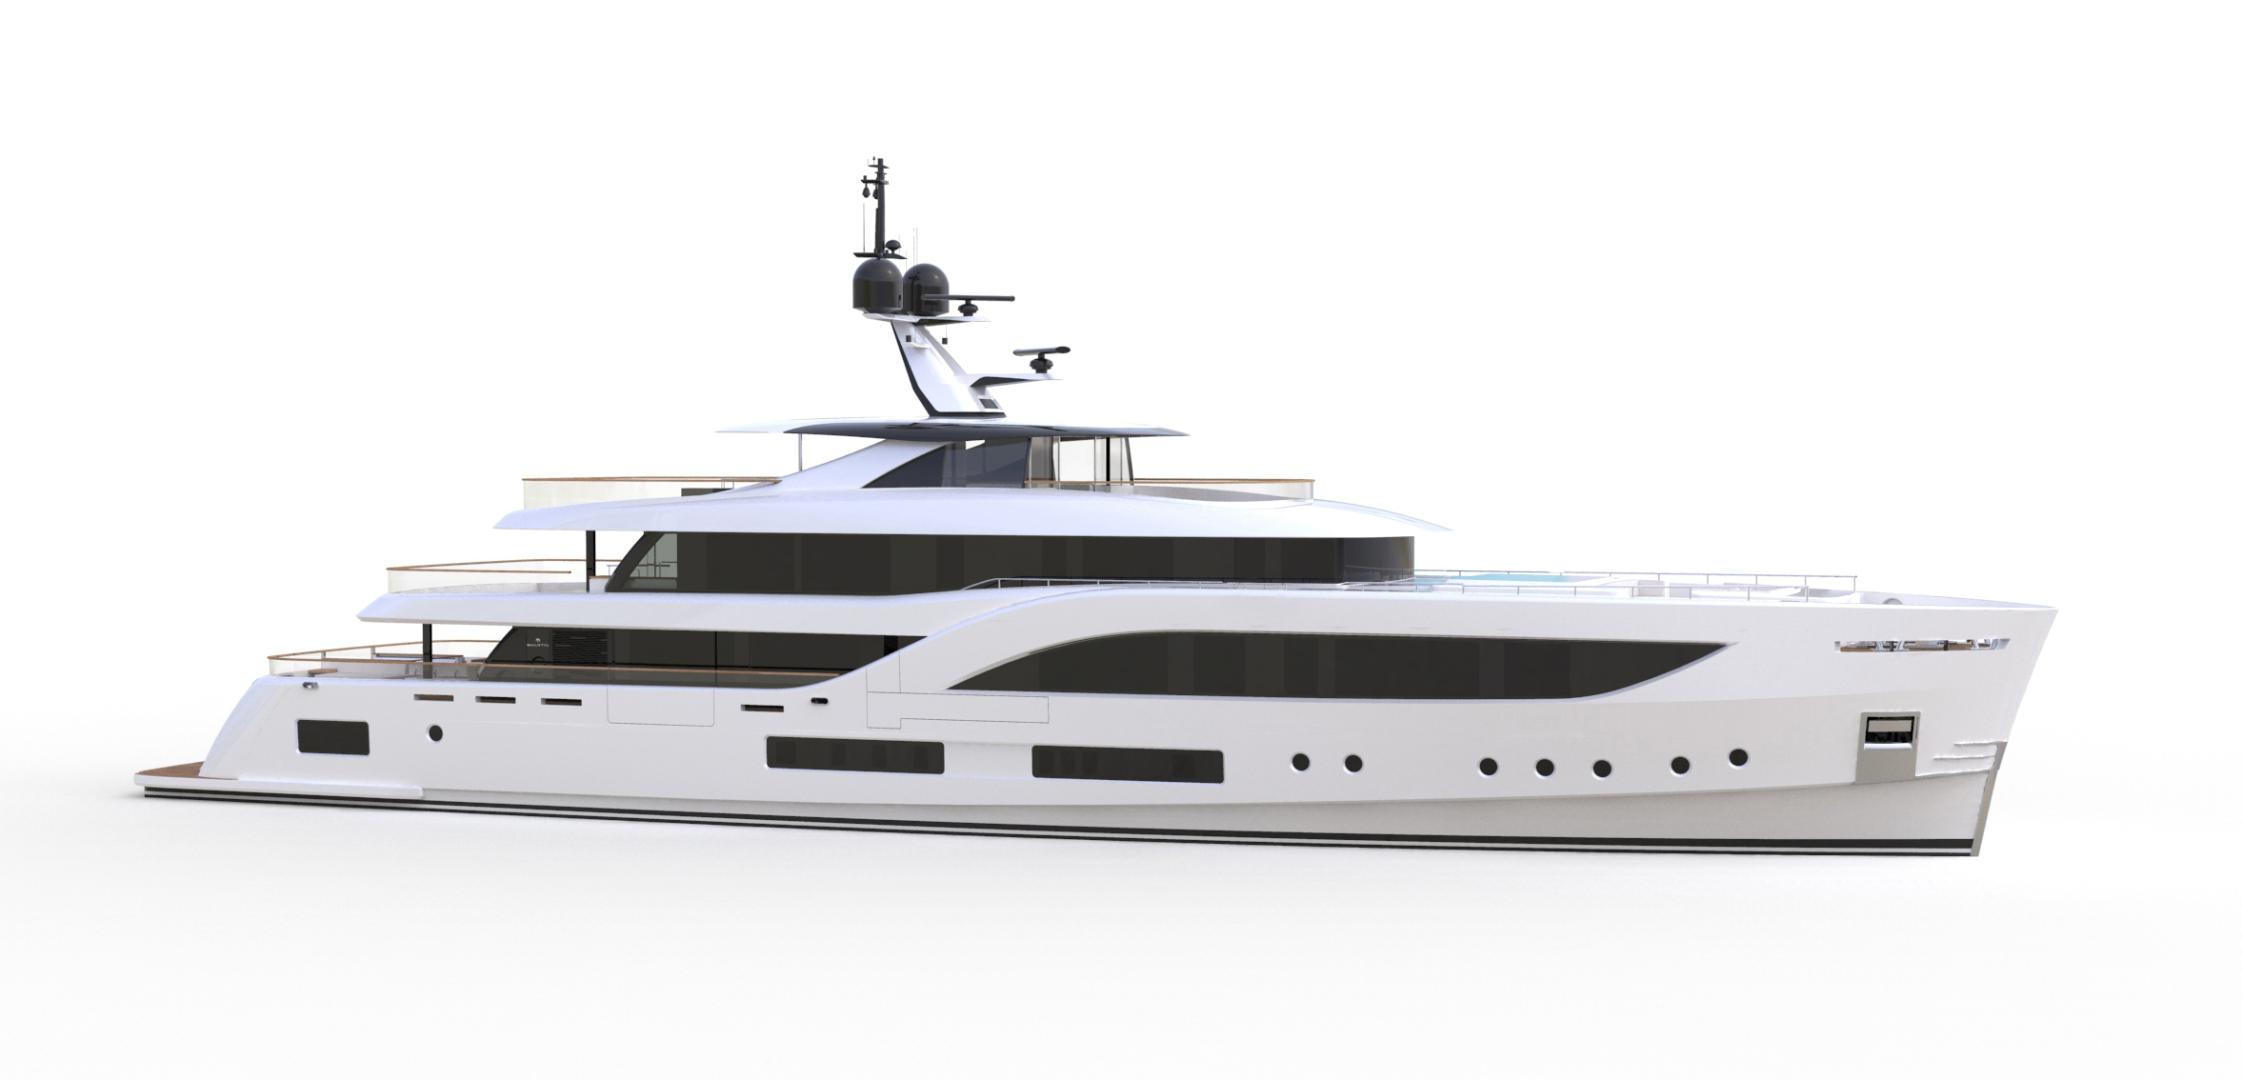 Baglietto reveals first image of the new 54m hull #10231